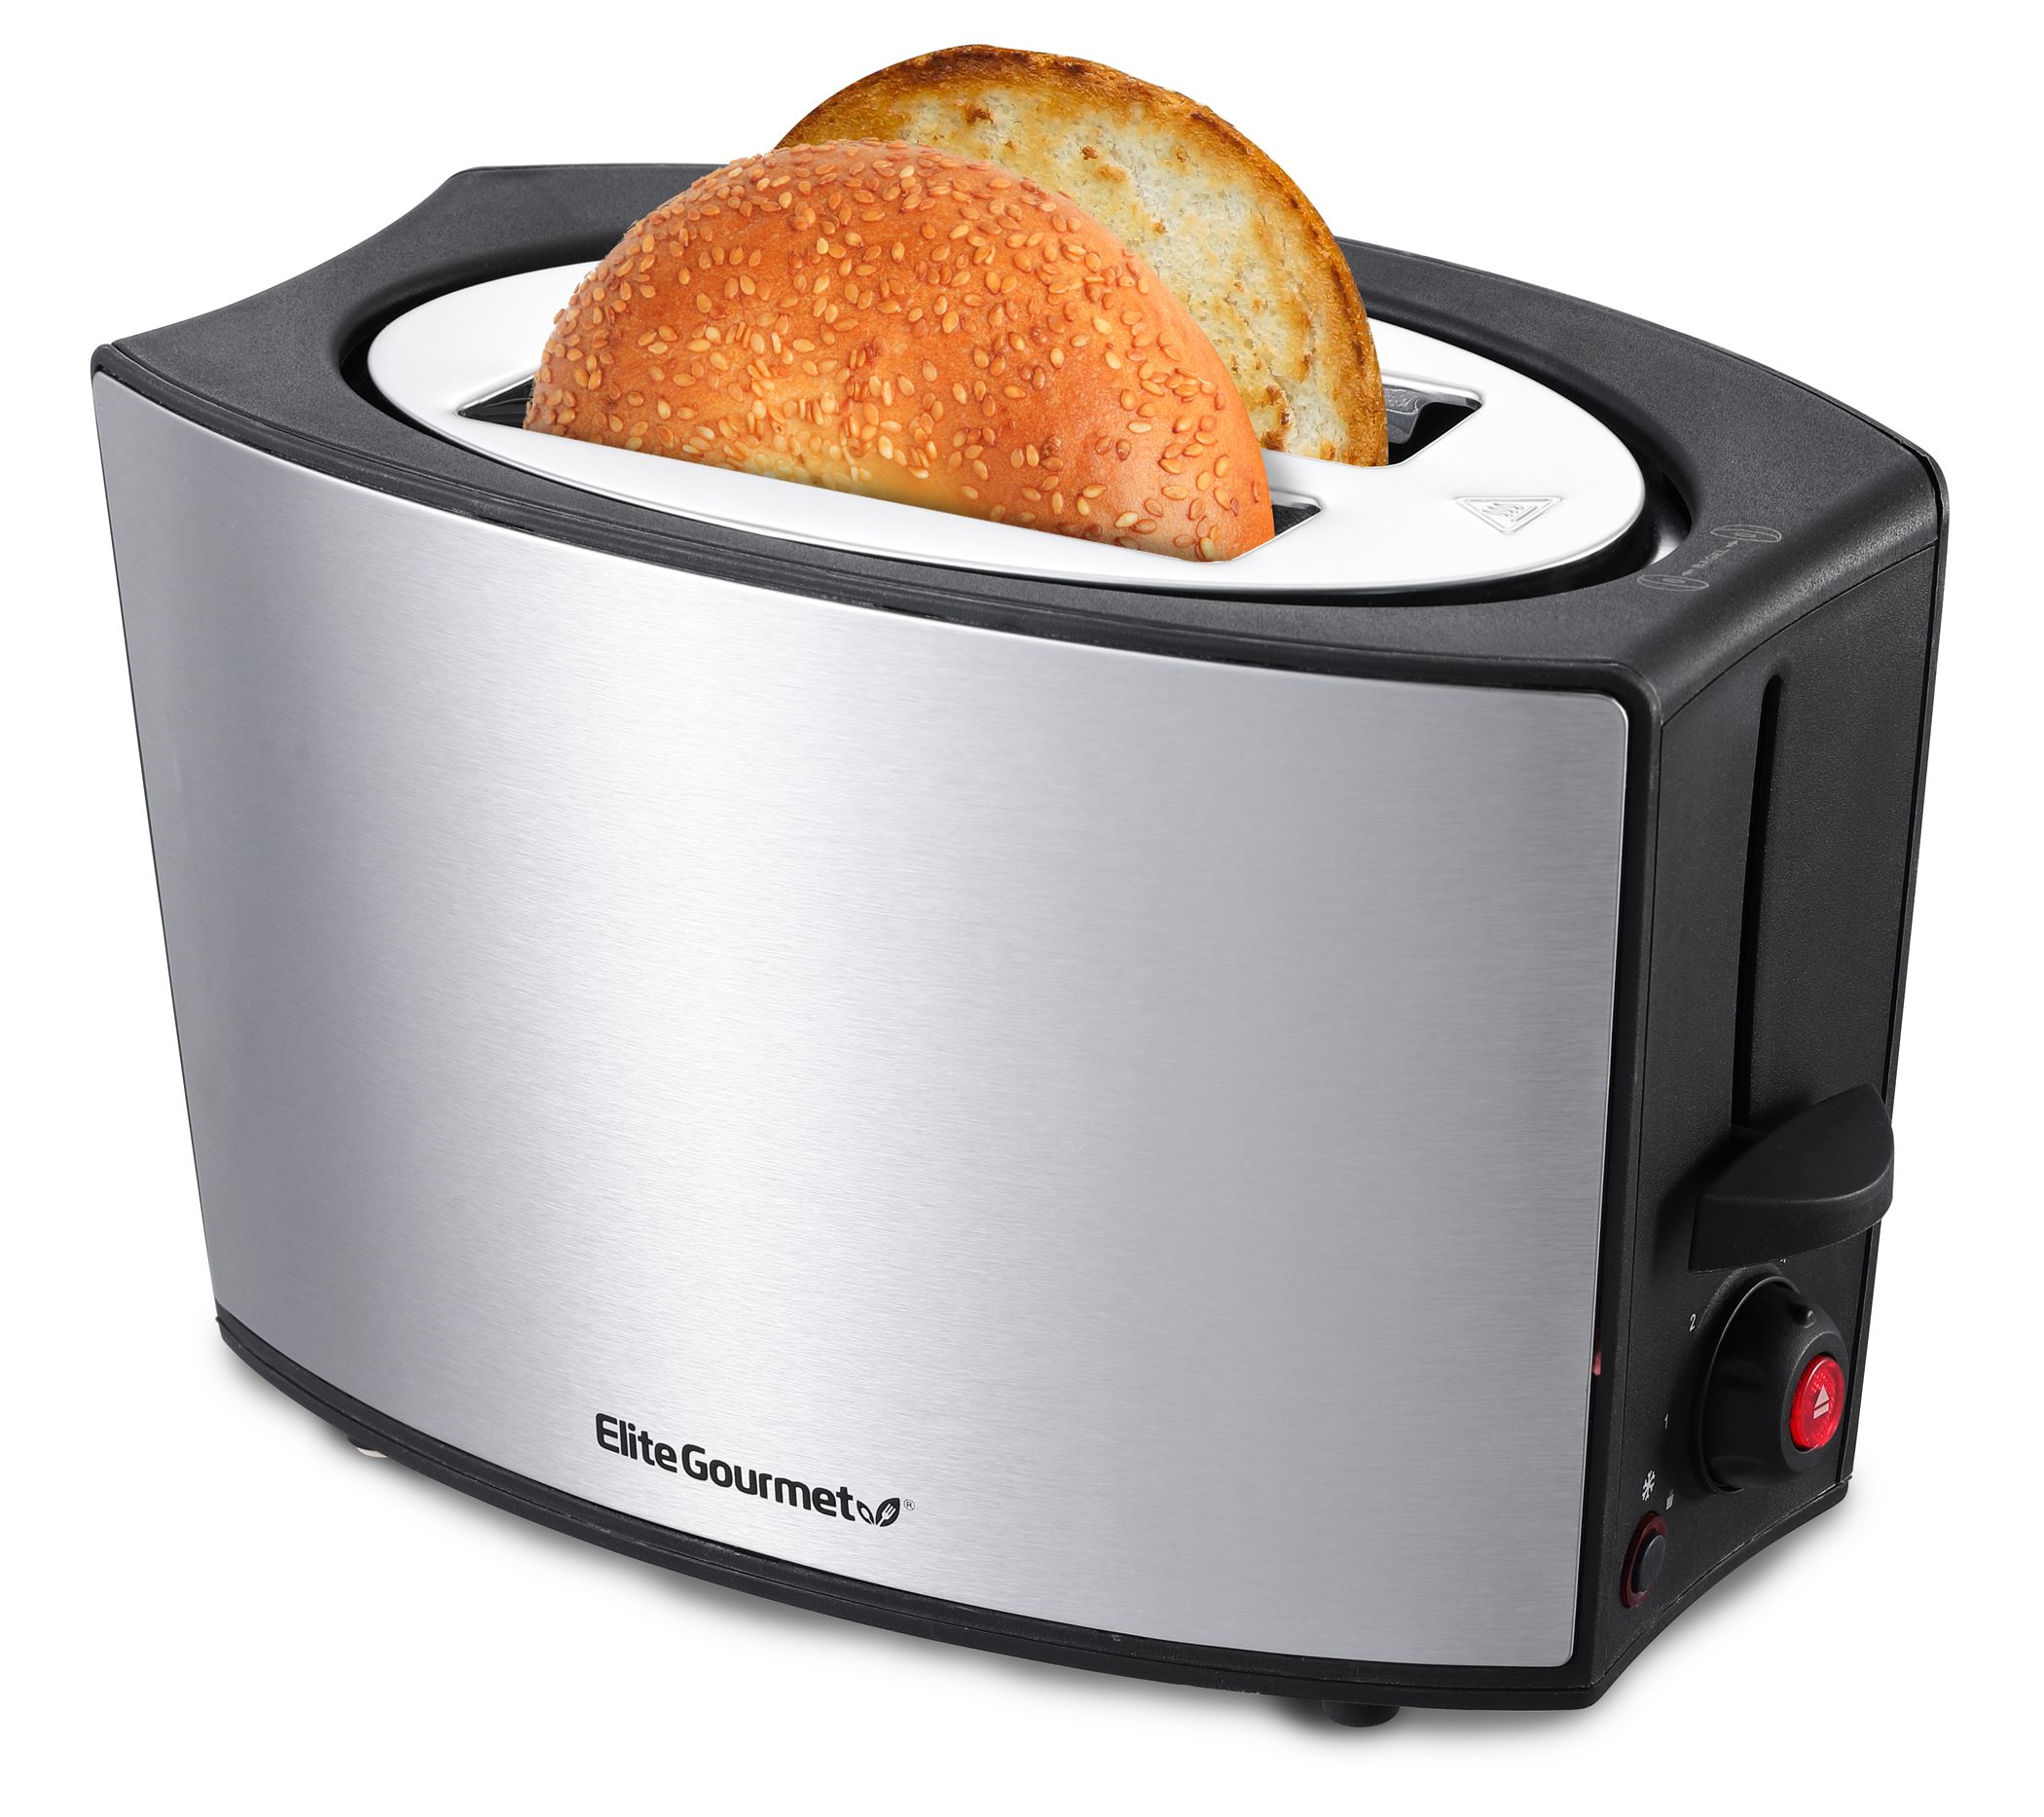 Maxi-Matic Elite Gourmet 4-Slice Long Slot Cool-Touch Toaster - Black